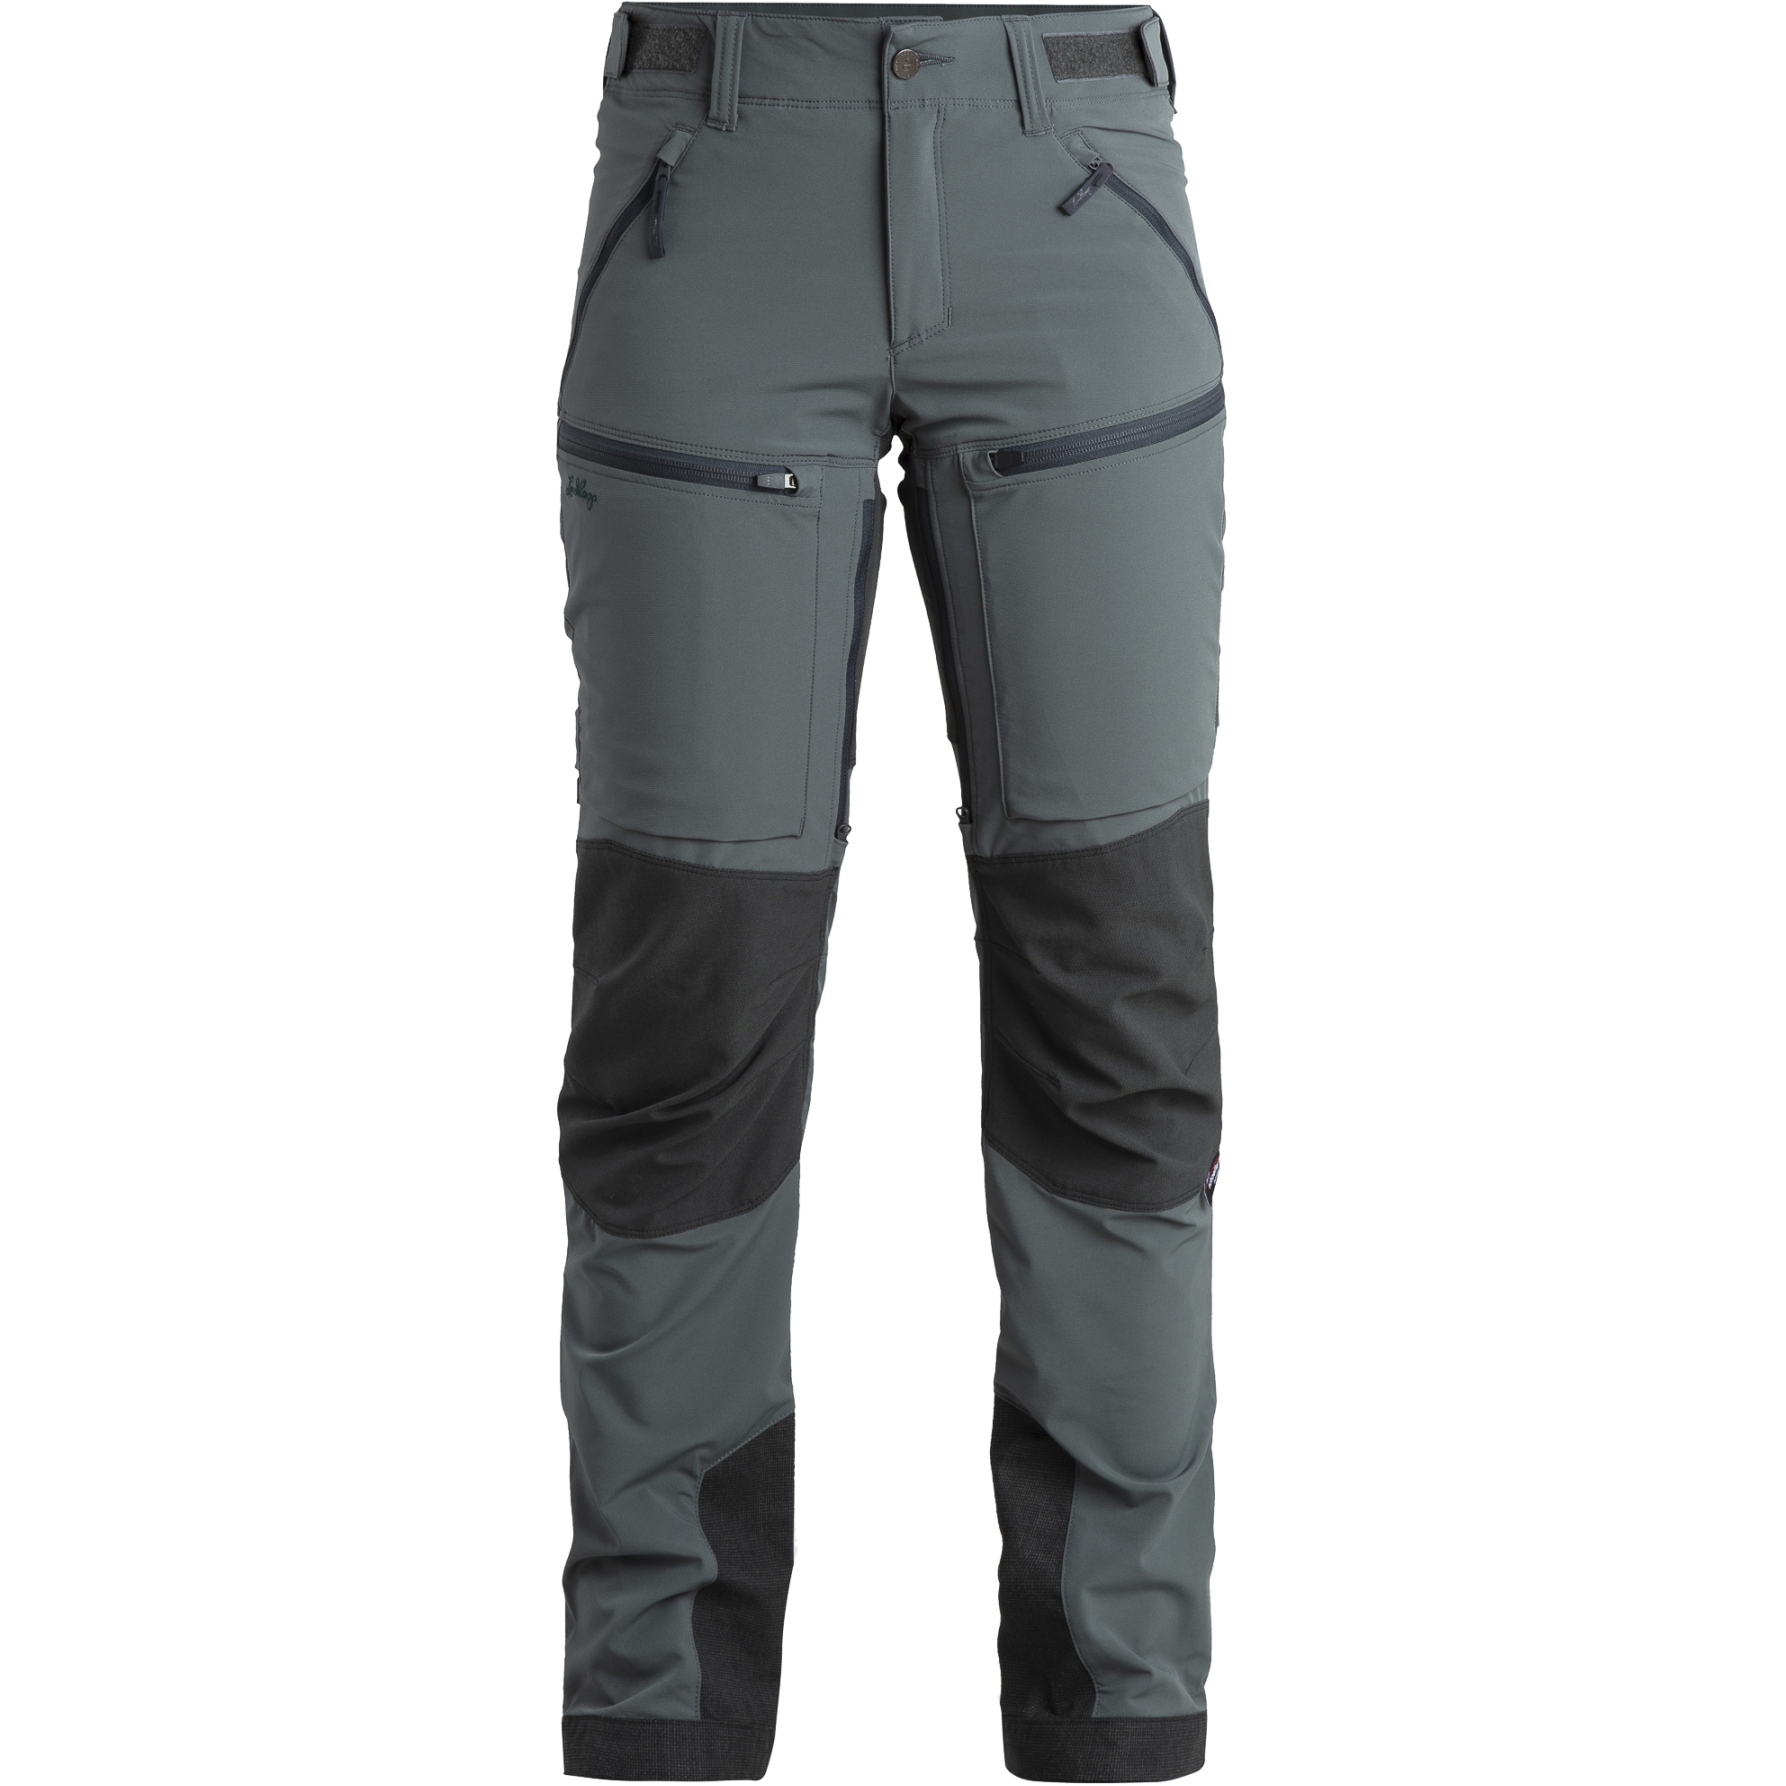 Picture of Lundhags Askro Pro Women&#039;s Hiking Pants - Dark Agave/Charcoal 664